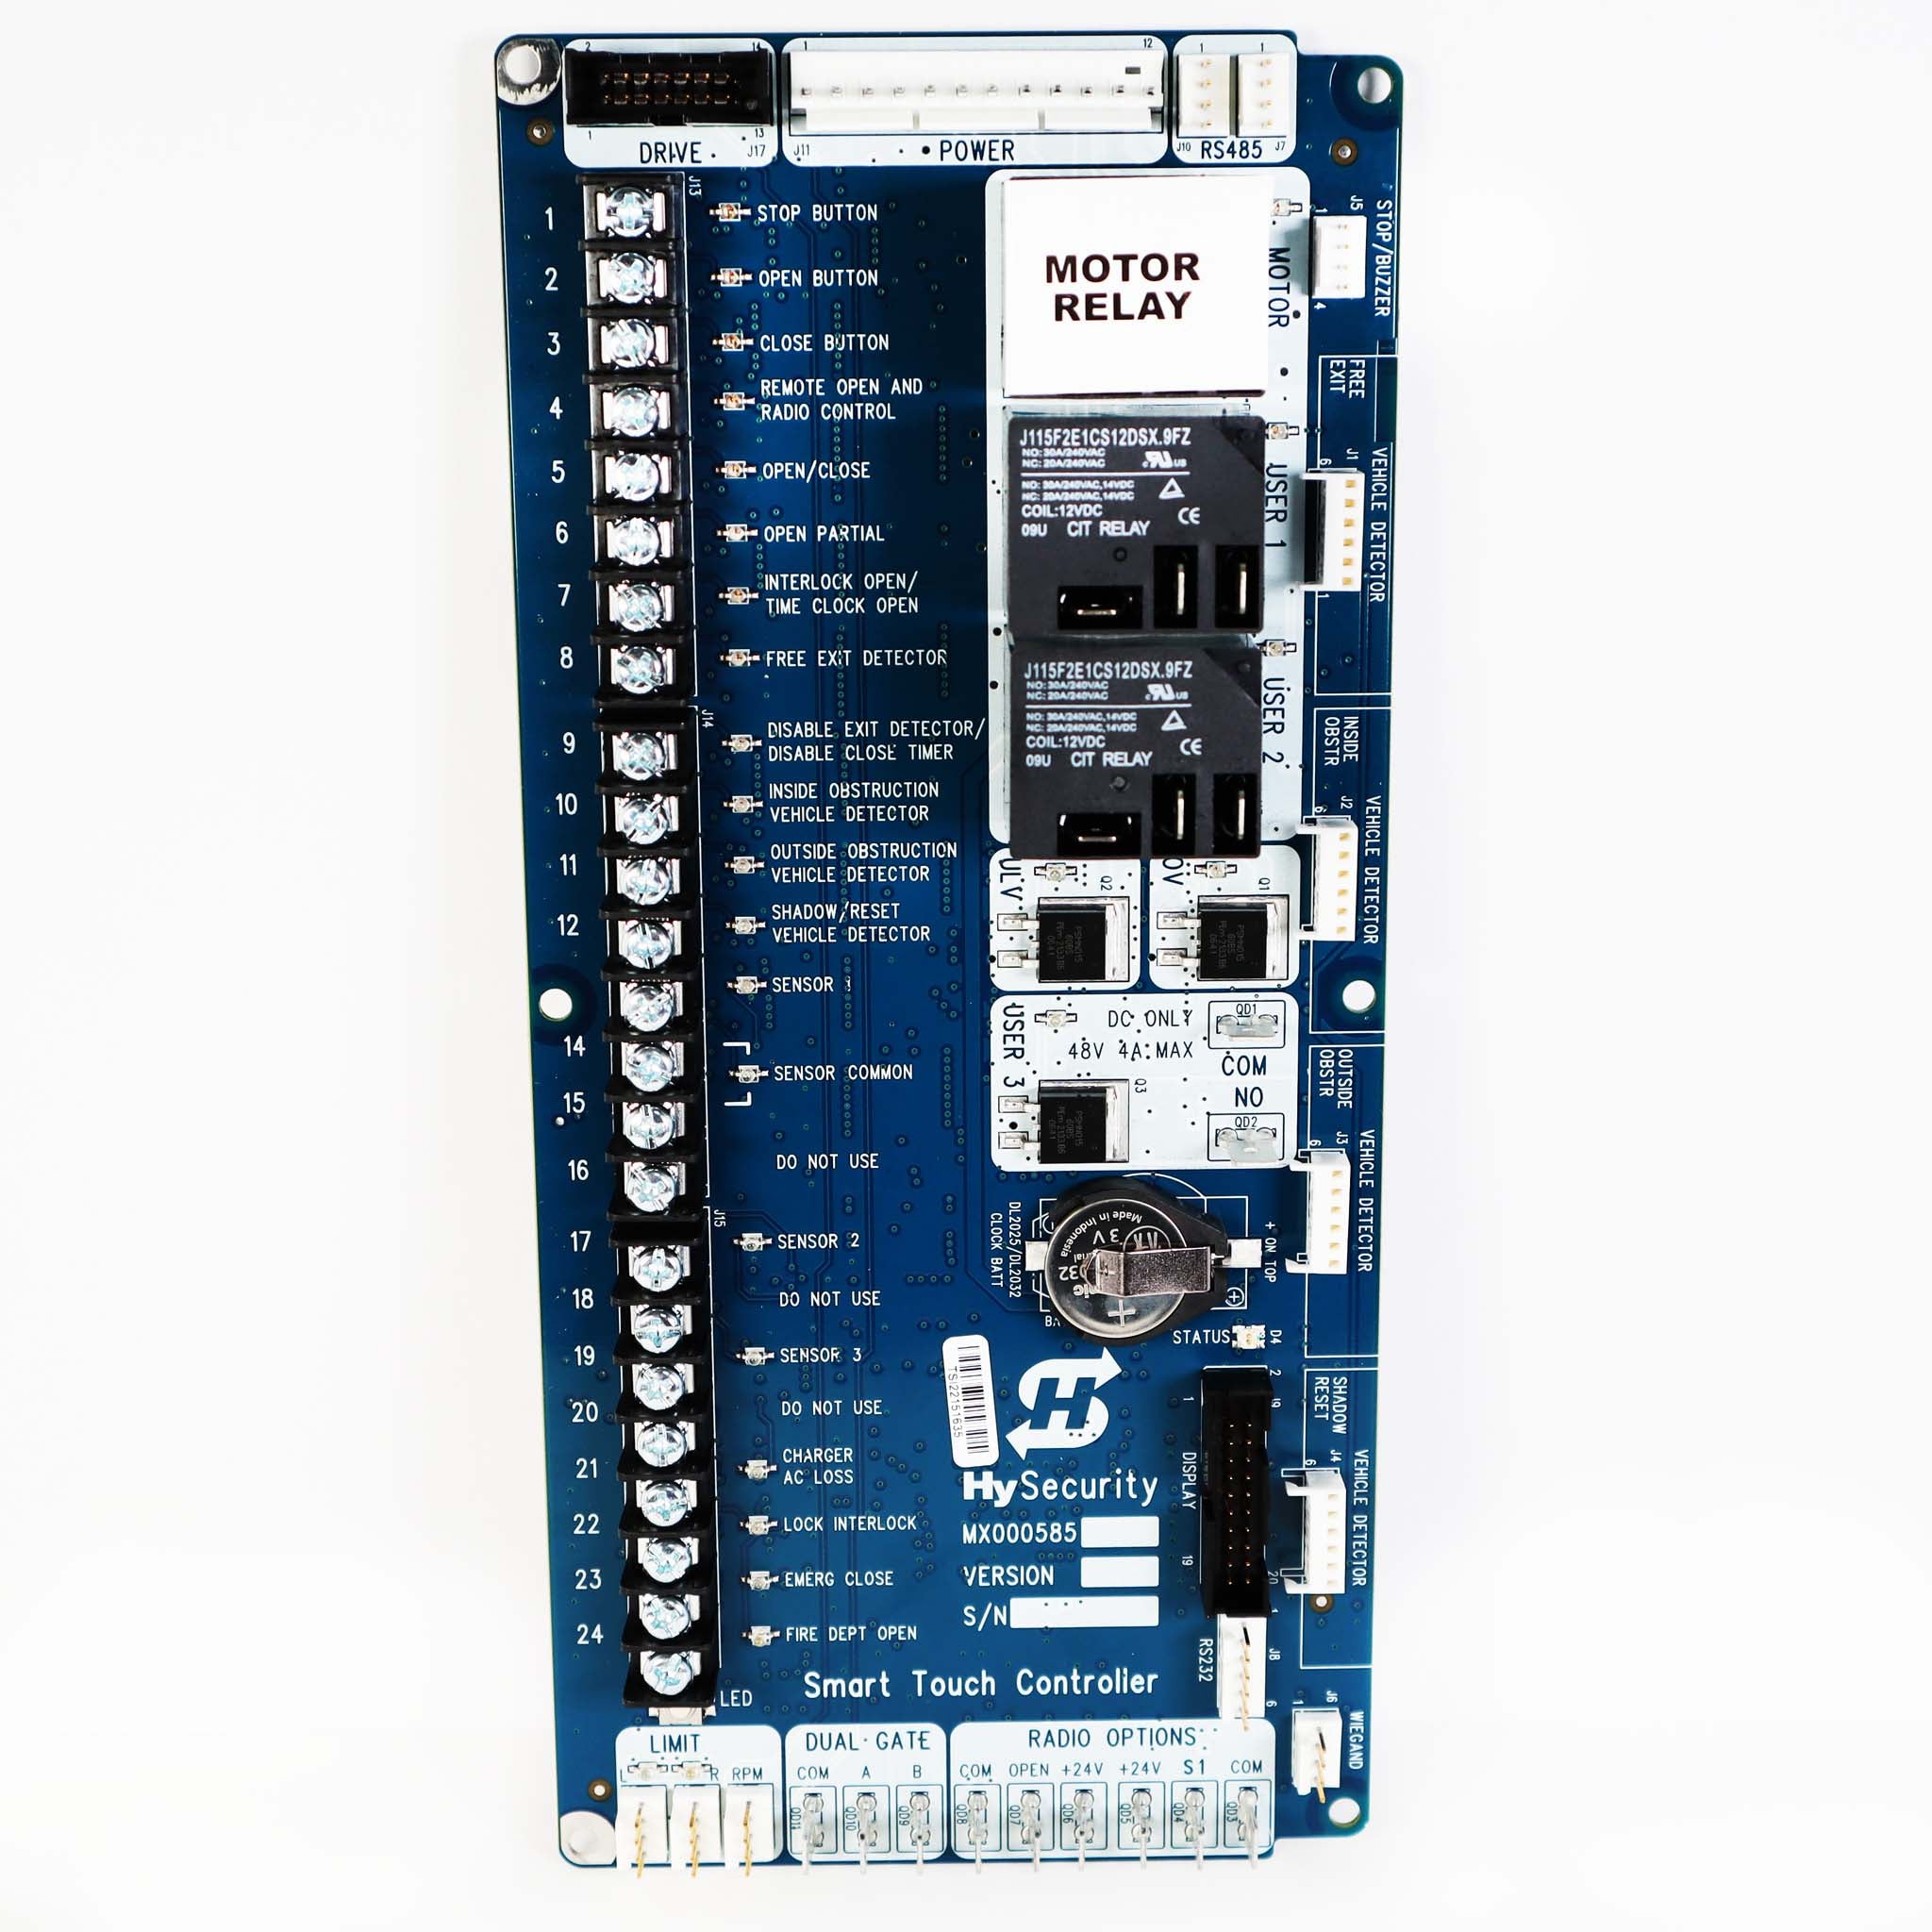 HySecurity MX000585-0 Control Board Smart Touch